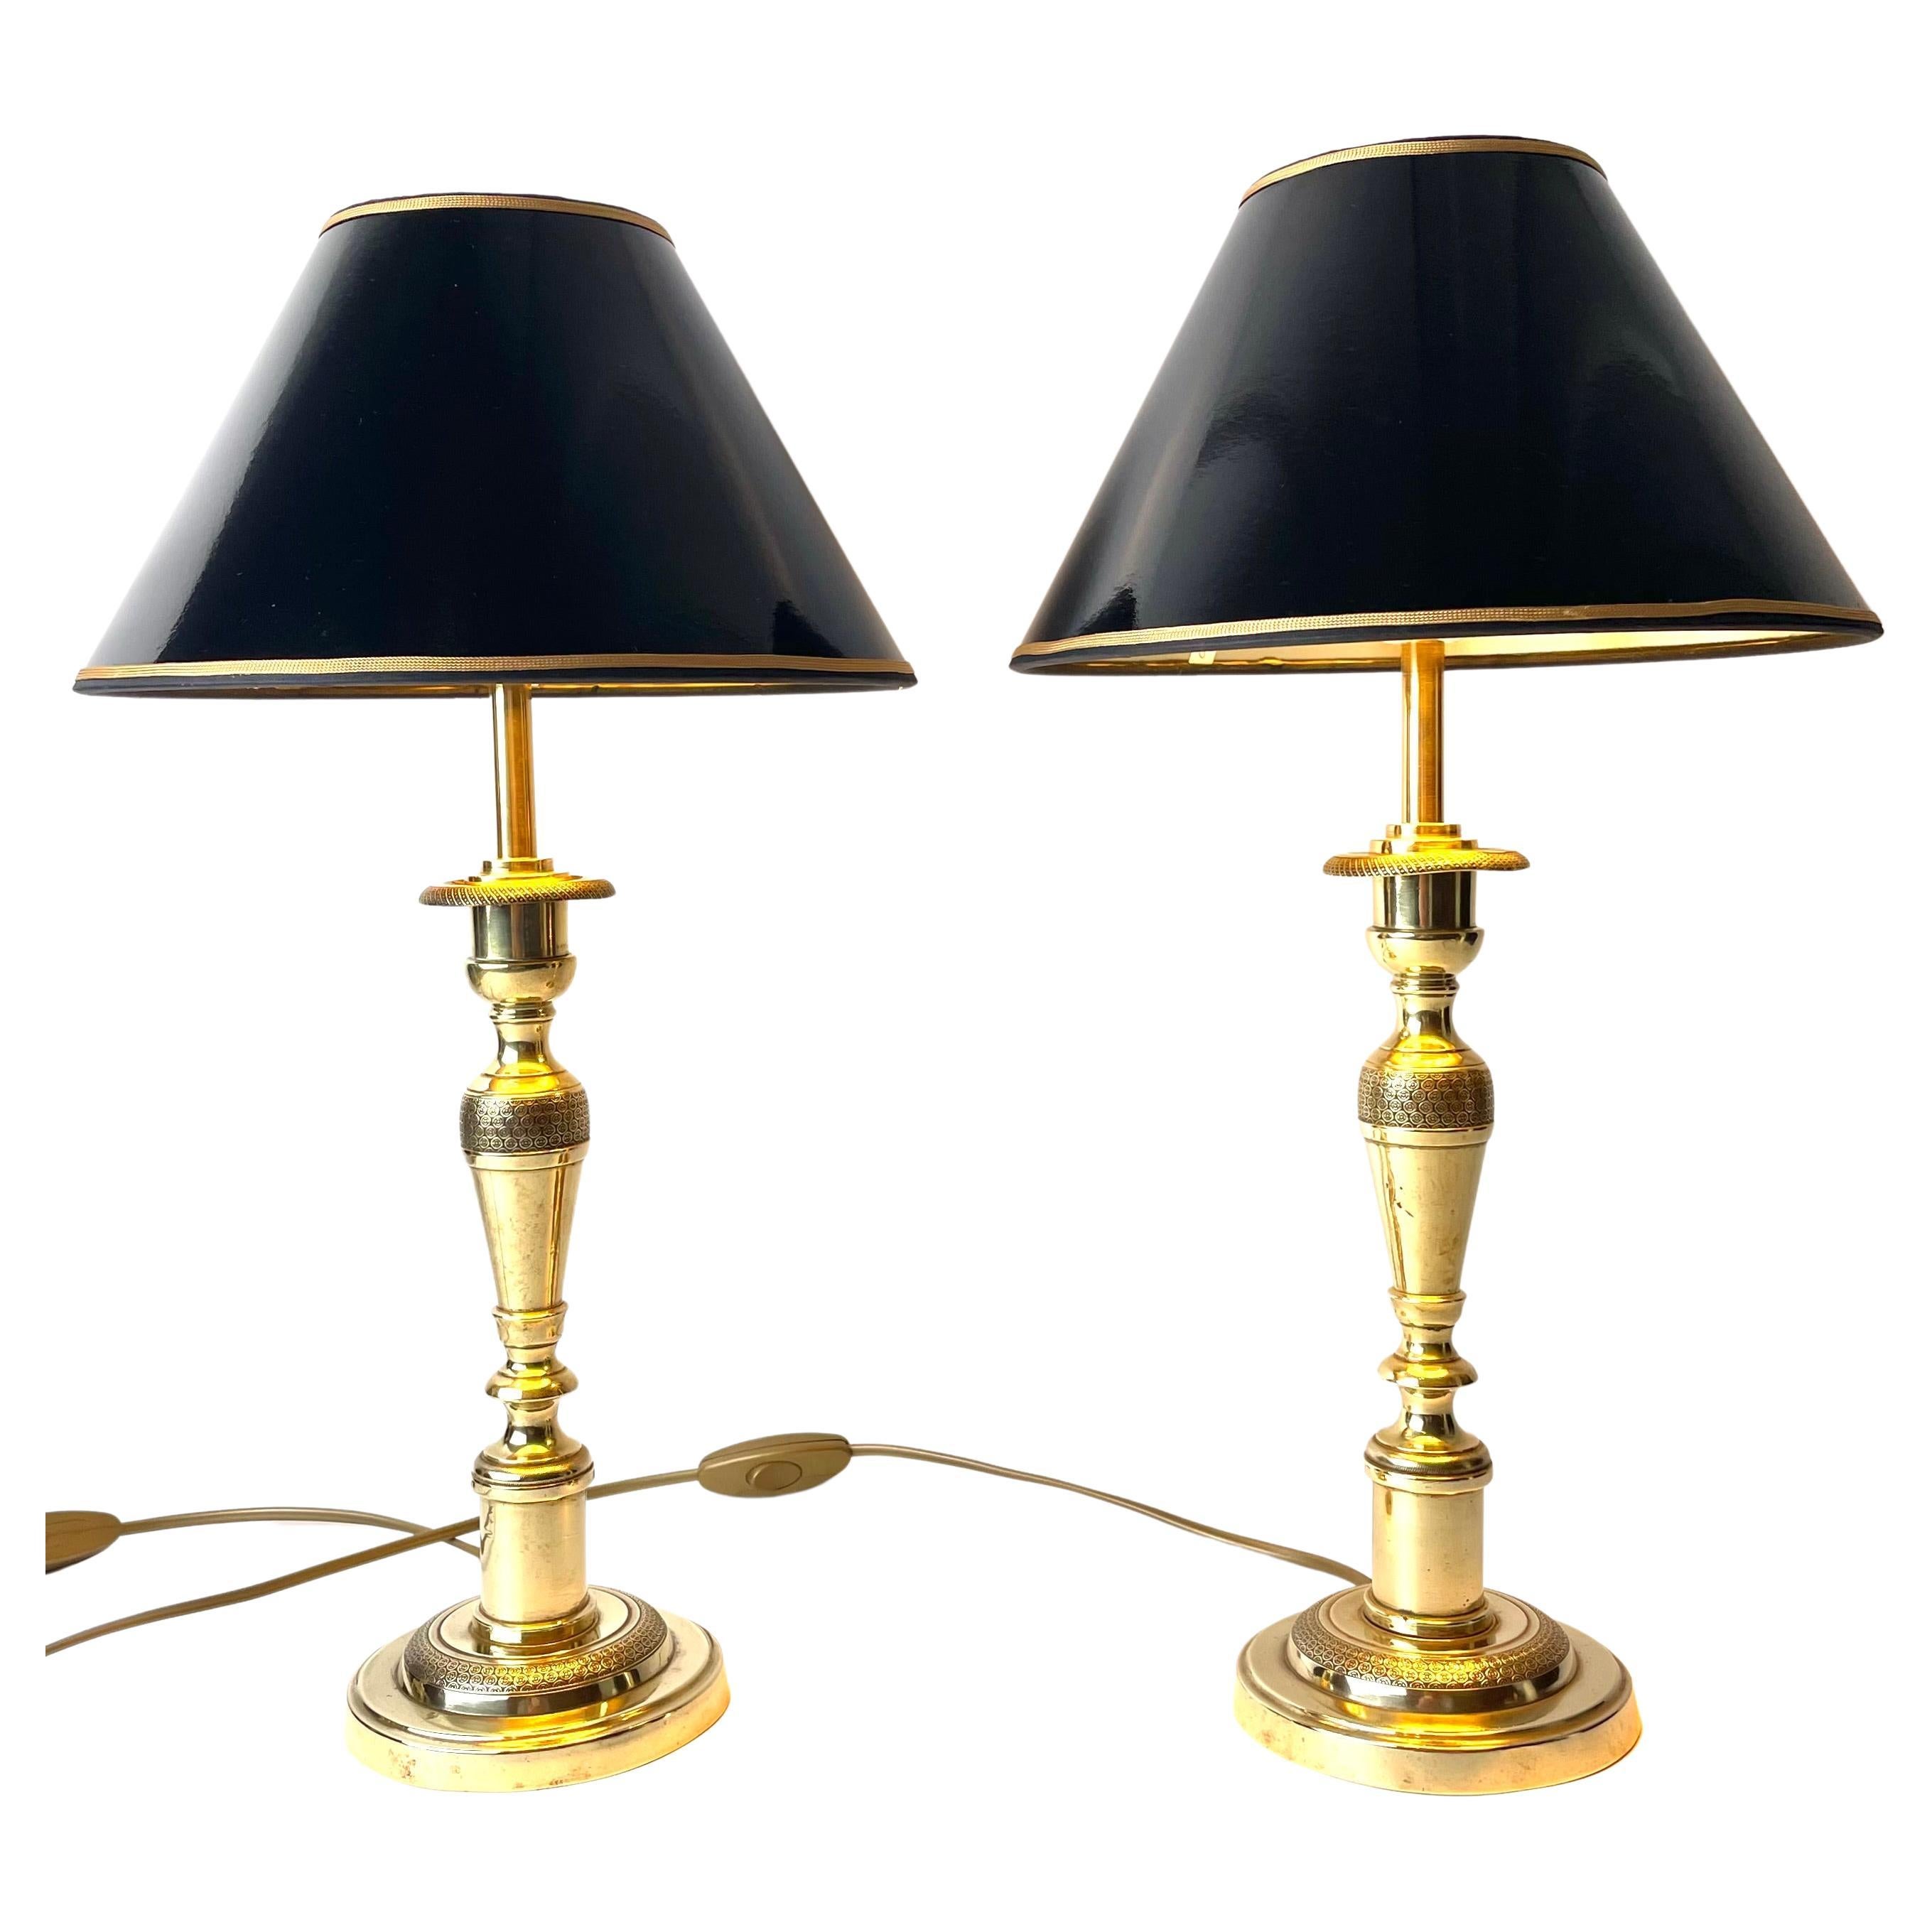 Pair of Elegant Empire Table Lamps in Brass, Early 19th Century